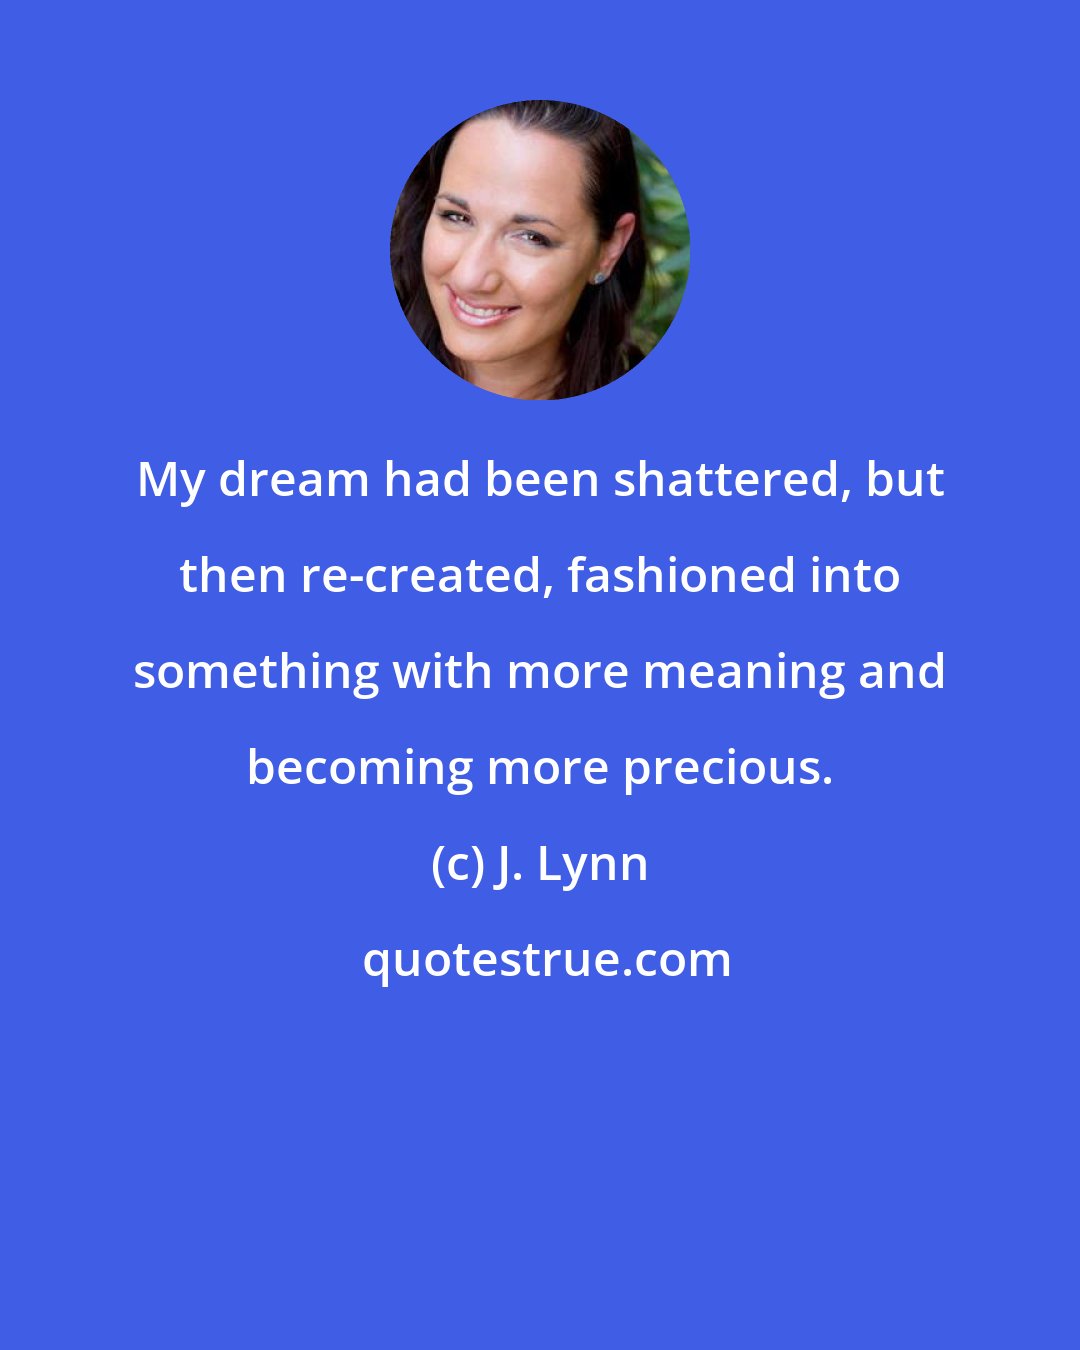 J. Lynn: My dream had been shattered, but then re-created, fashioned into something with more meaning and becoming more precious.